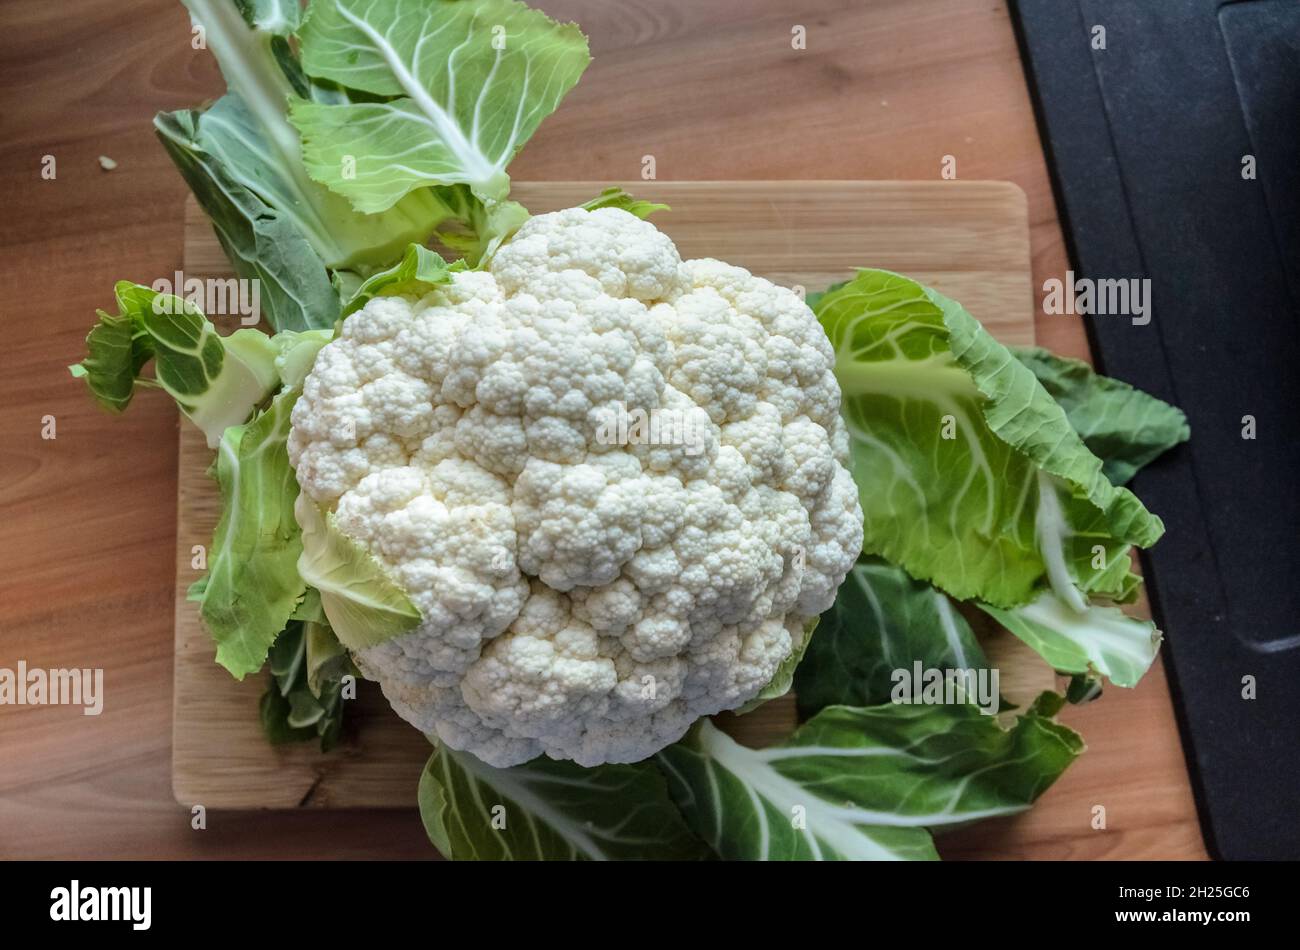 Cauliflower head (Brassica oleracea) with green leaves, close-up view from directly above Stock Photo